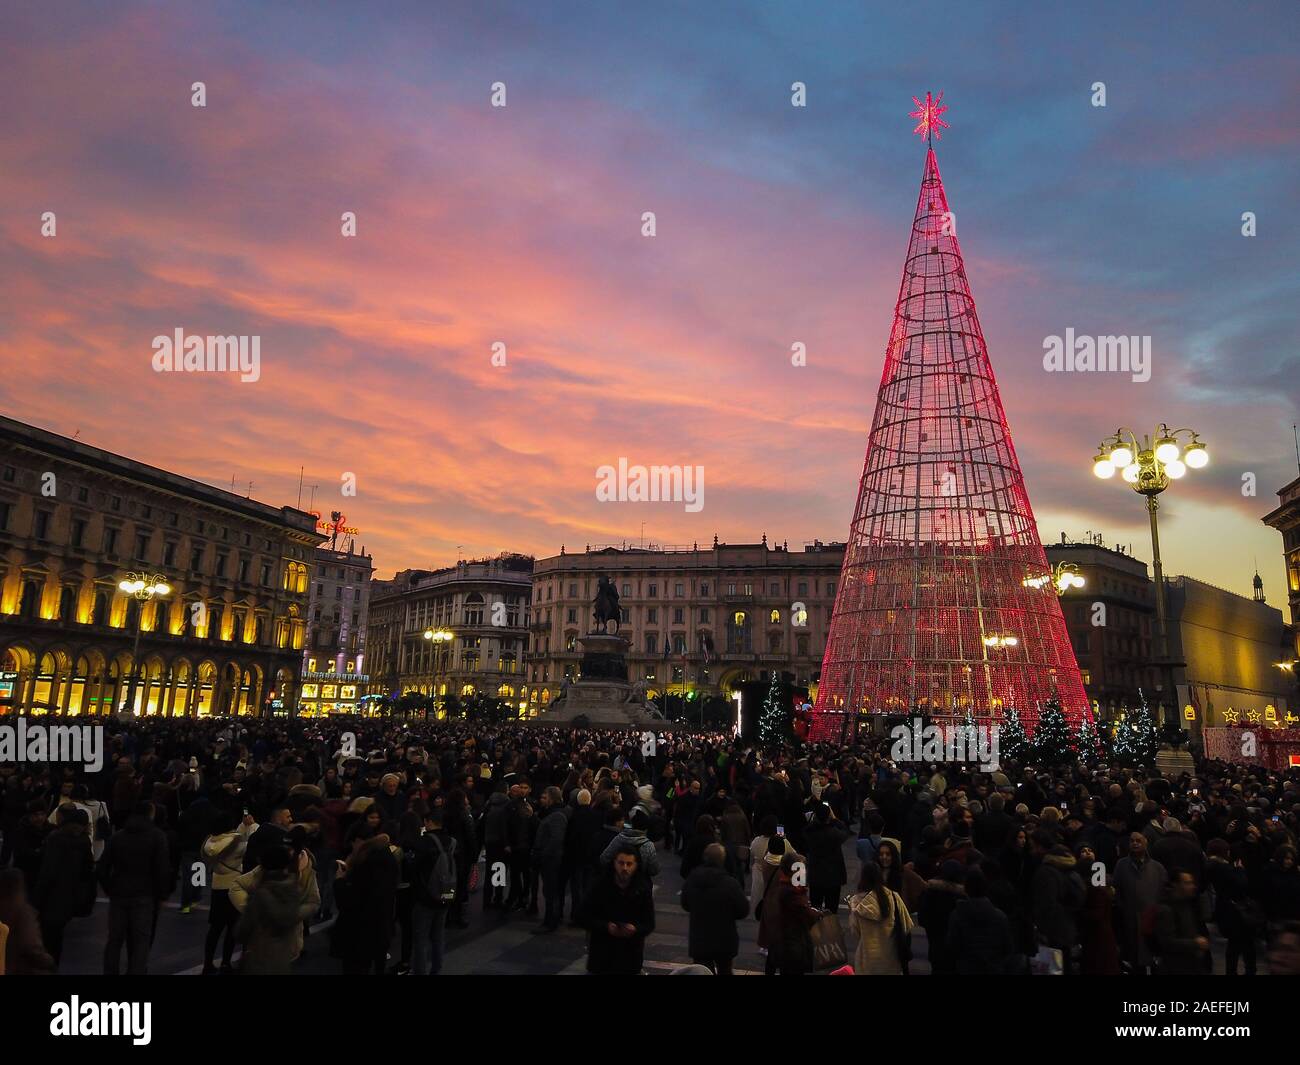 Milan, Italy - December 7, 2019 Crowds of people gathers at Piazza Duomo in Milan to welcome Christmas season Stock Photo